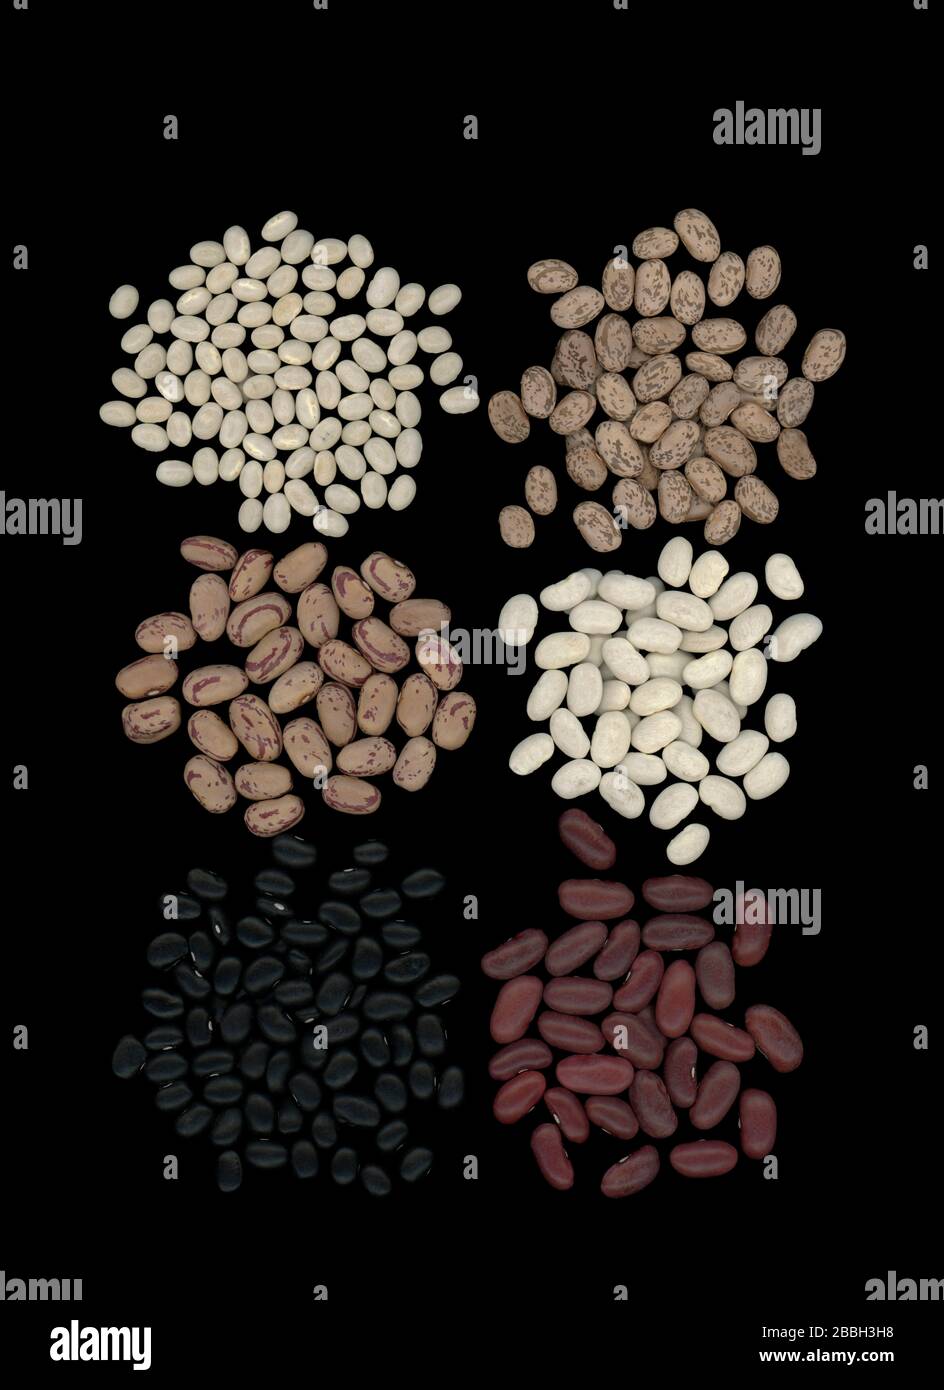 Presentation of dried beans or pulses grown in Canada. Six varieties of dried beans on a black background: black turtle beans, cranberry beans, dark red kidney beans, Great Northern beans, navy beans and pinto beans. Stock Photo